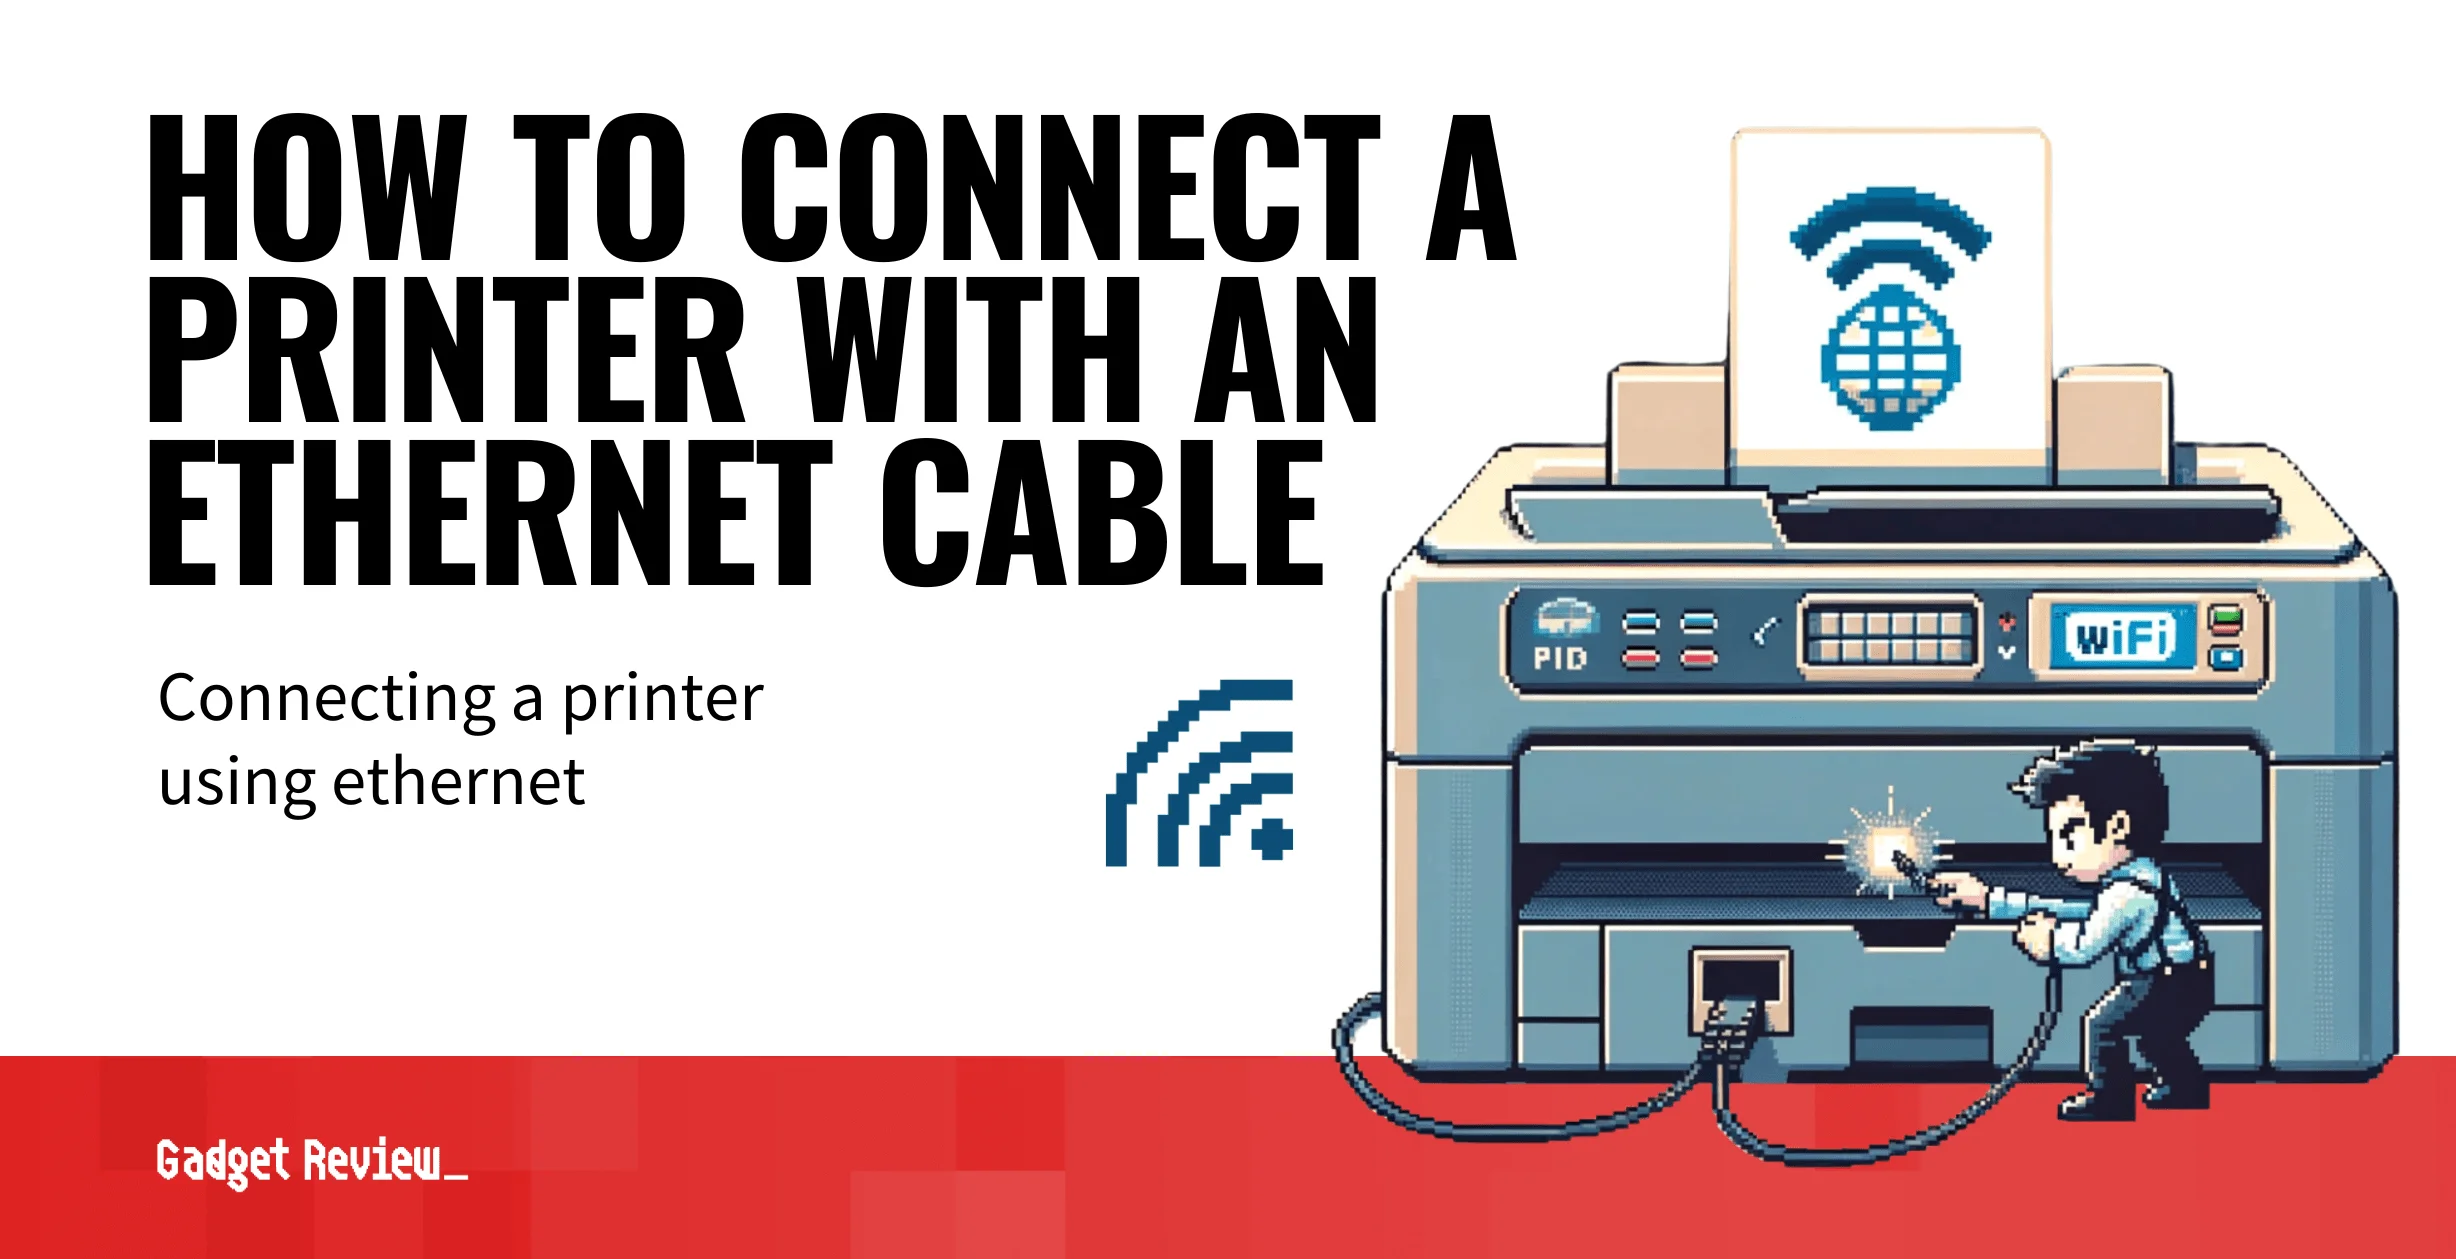 How to Connect a Printer With an Ethernet Cable